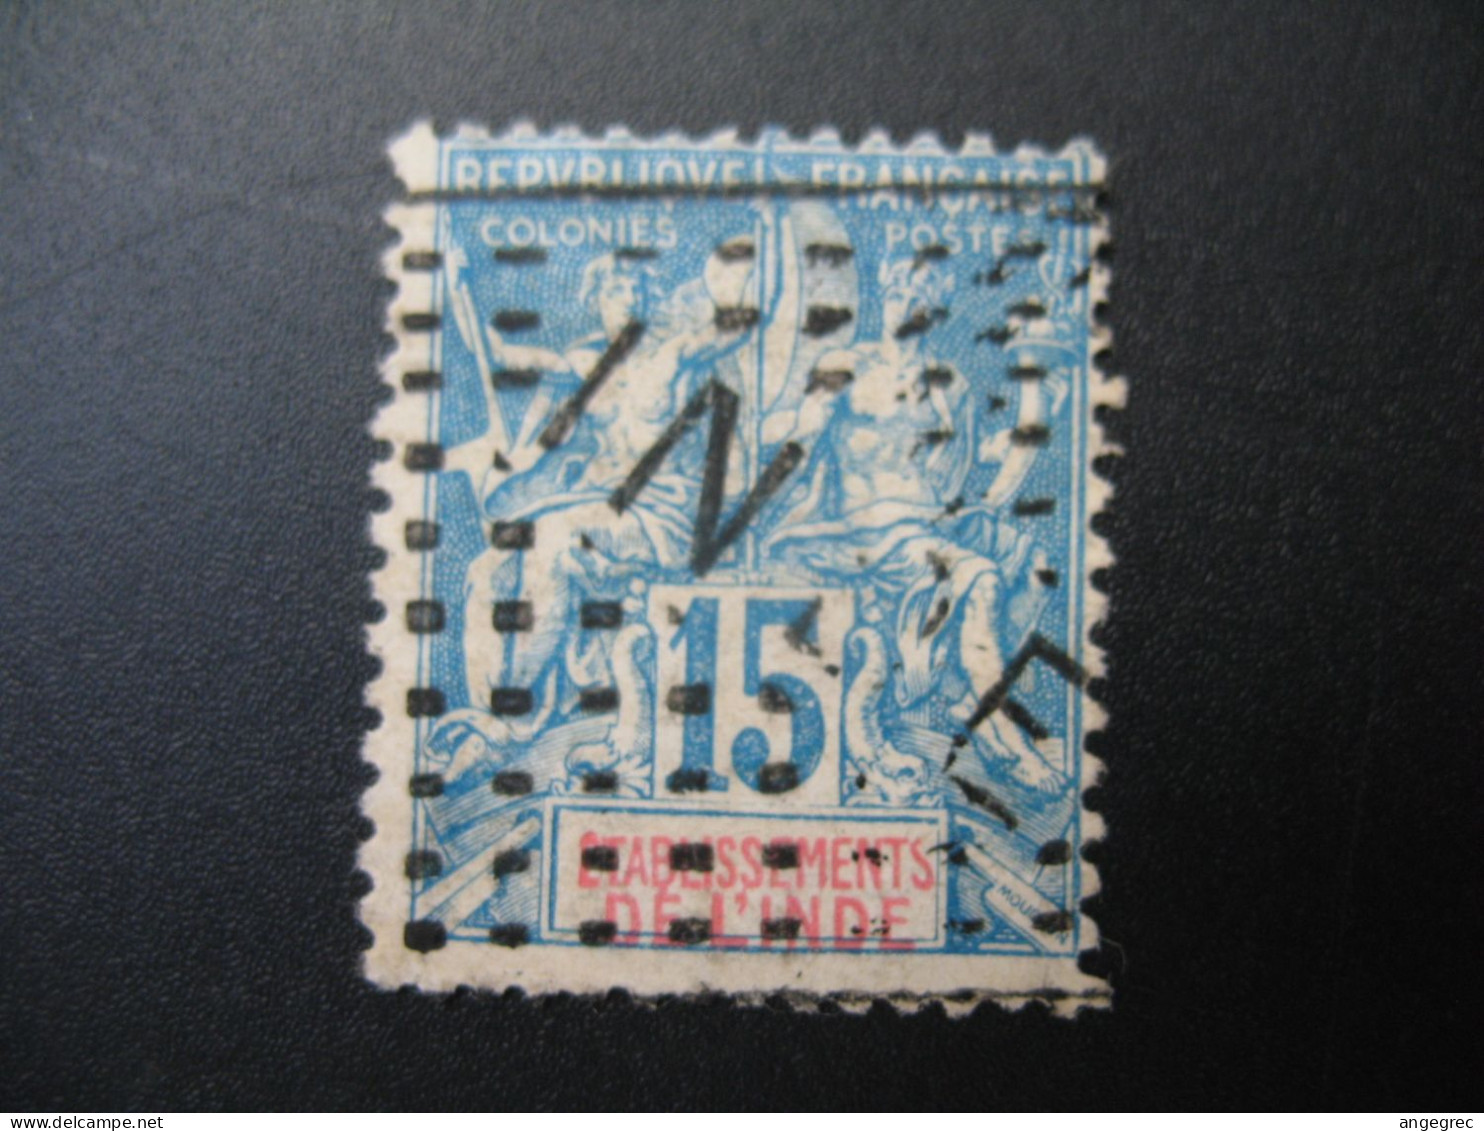 Inde Française Karikal Stamps French Colonies N° 6 Neuf * NSG Maury à Voir - Gebraucht